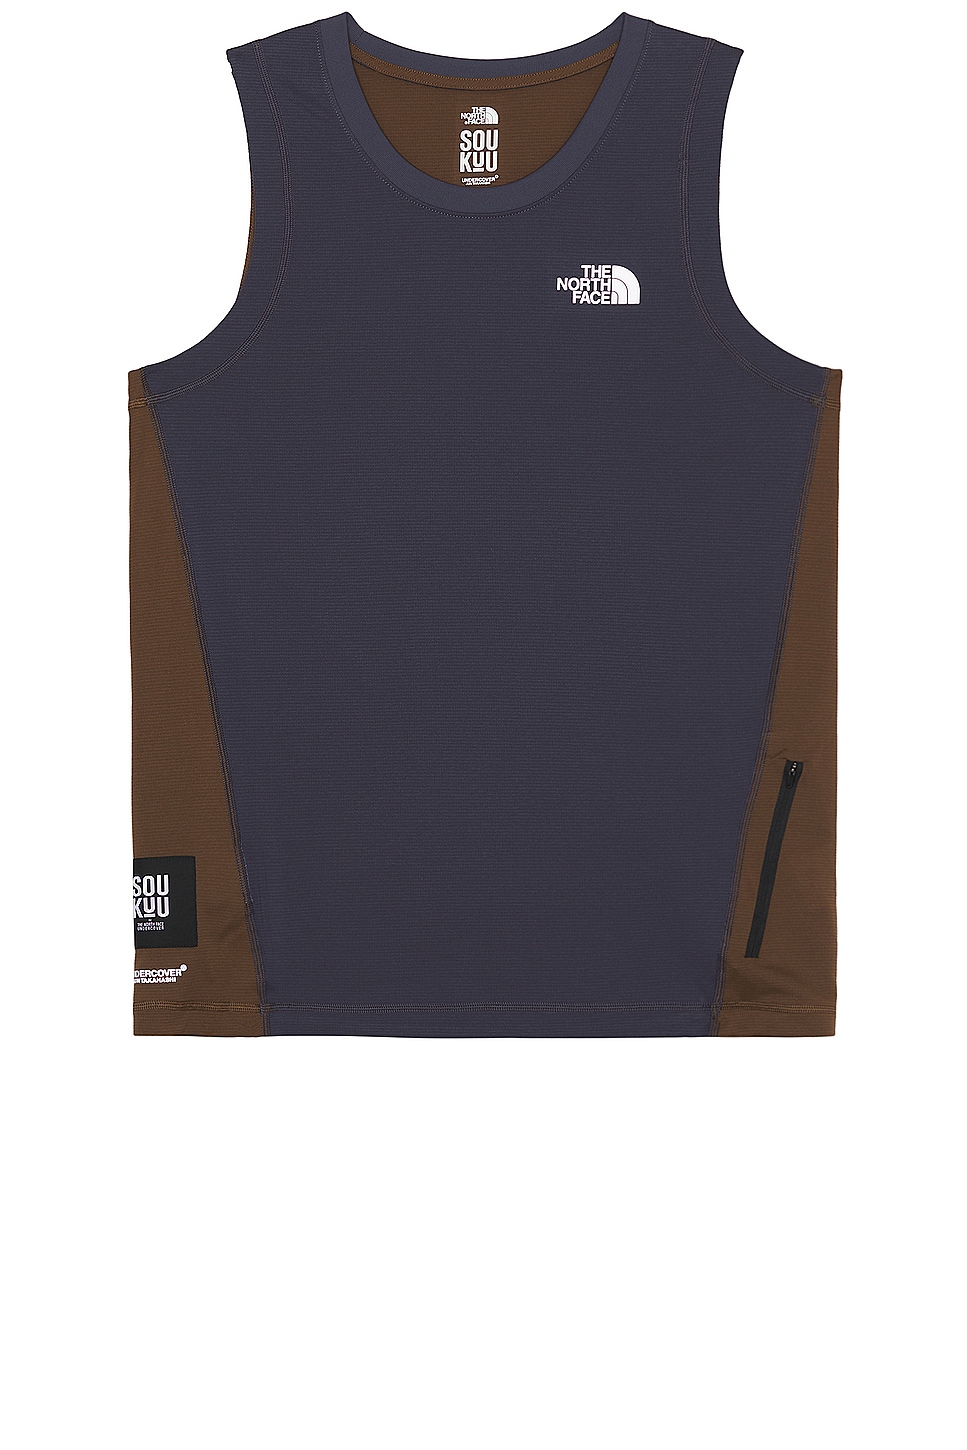 Image 1 of The North Face Soukuu Trail Run Tank Top in Periscope Grey